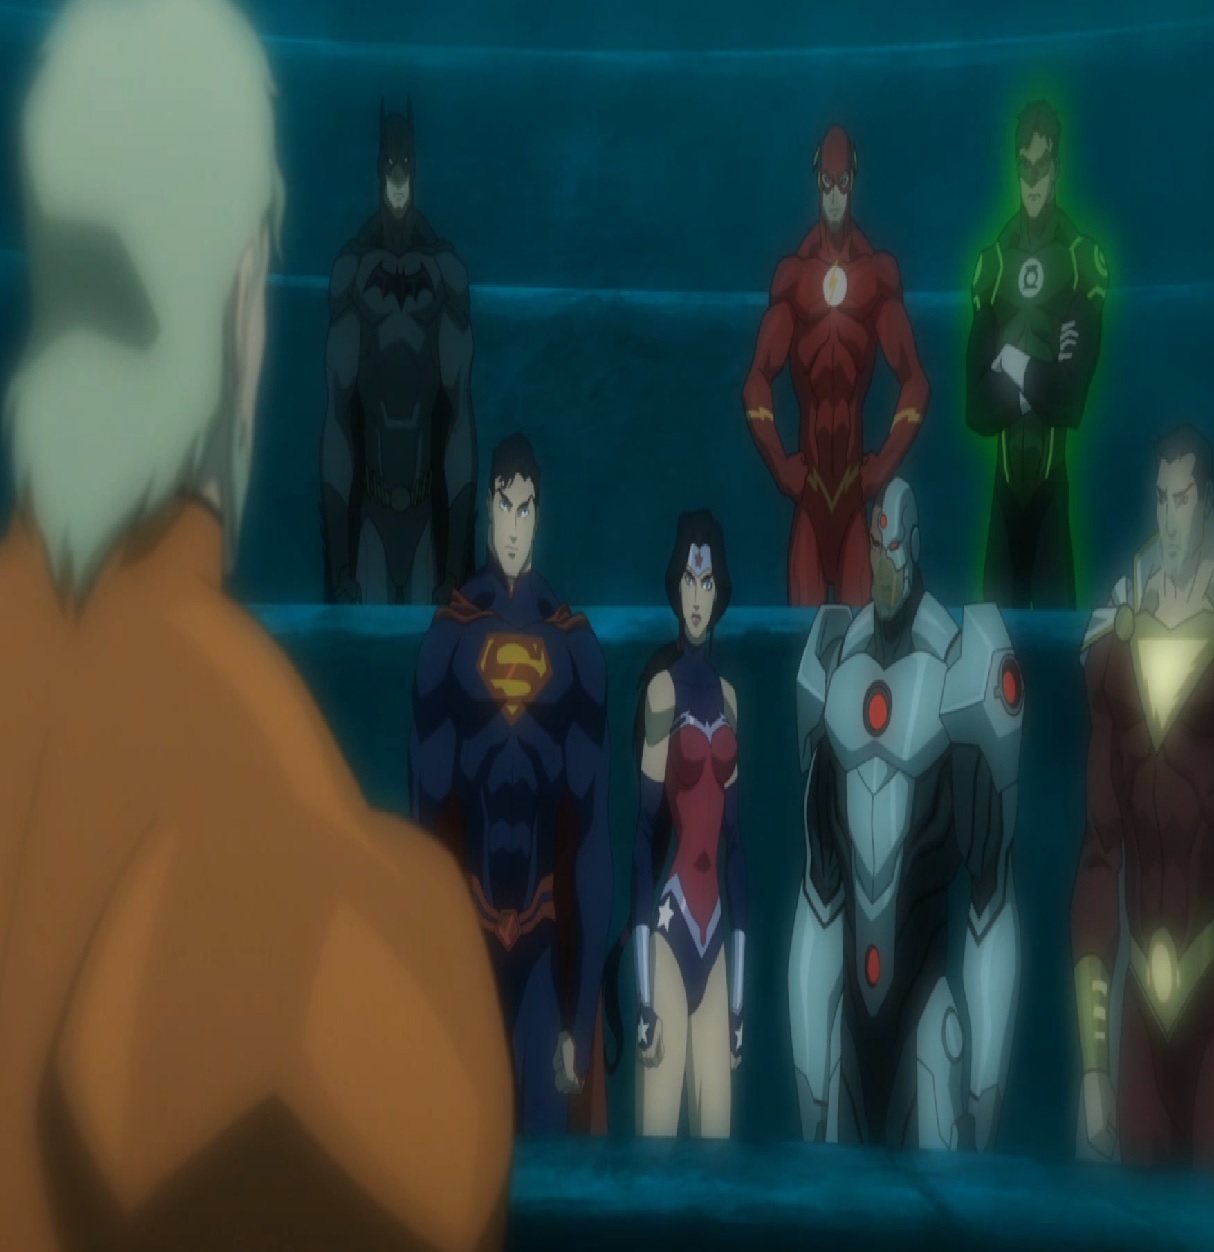 Justice League Throne Of Atlantis Wallpapers